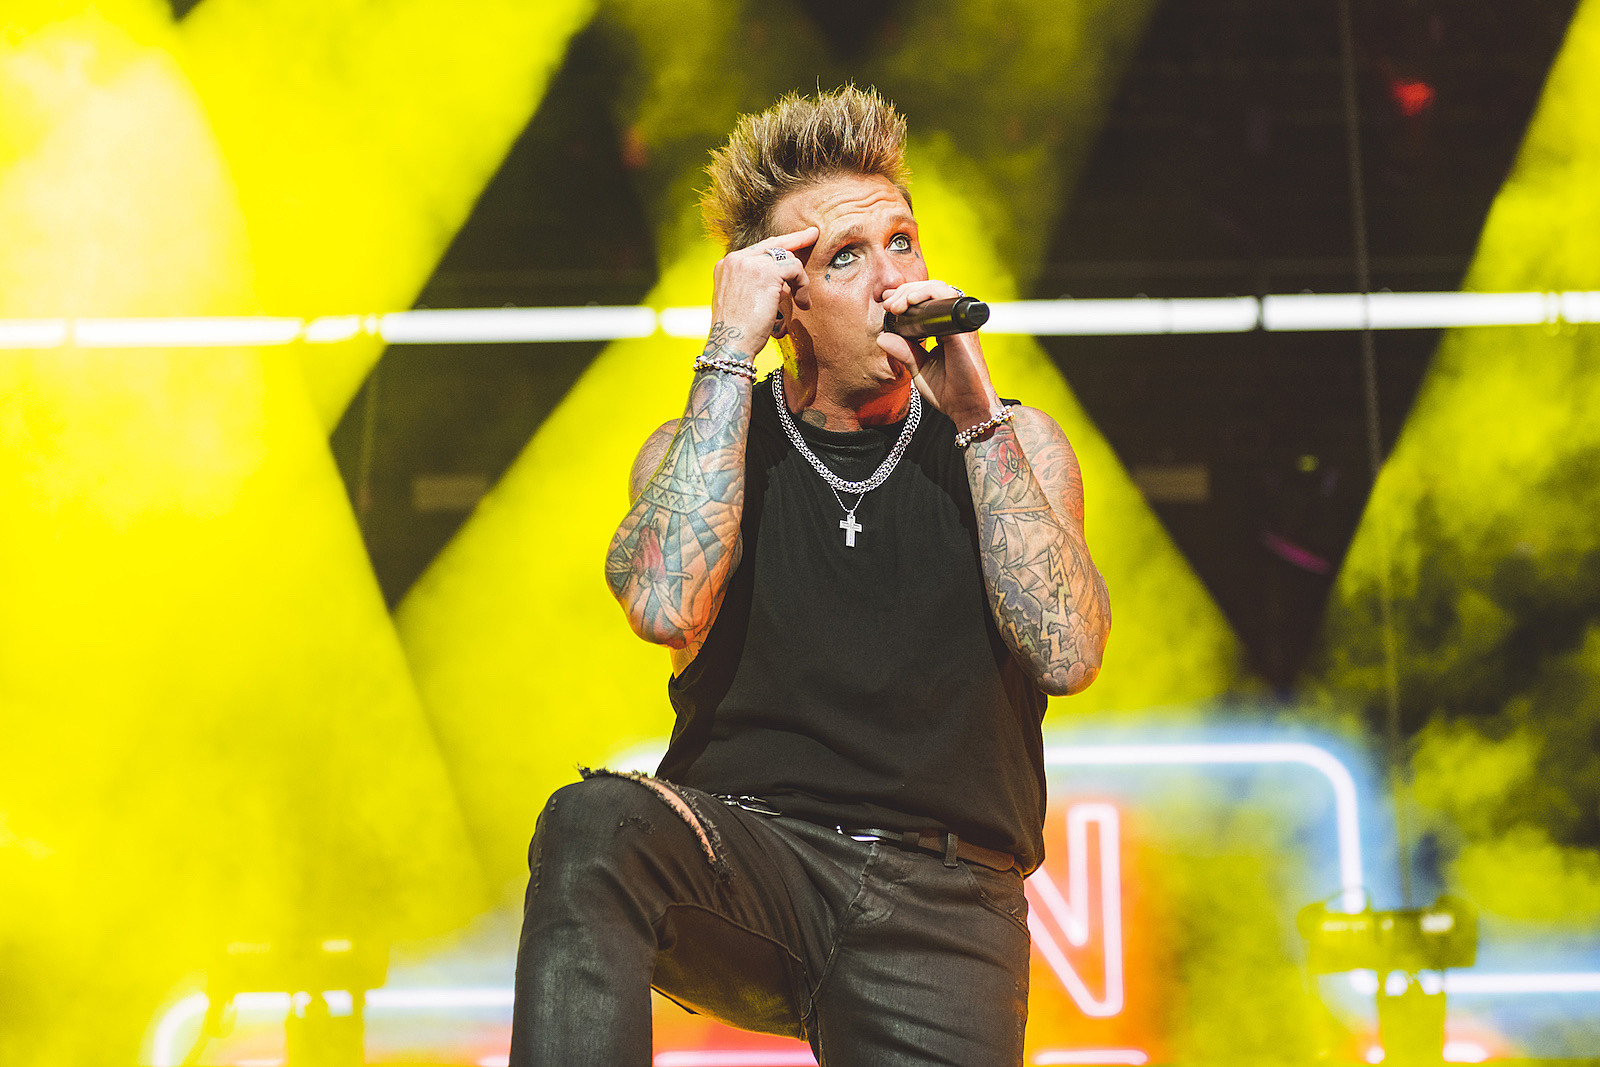 Jacoby Shaddix Wants Fans to Find Hope in Papa Roach’s Music